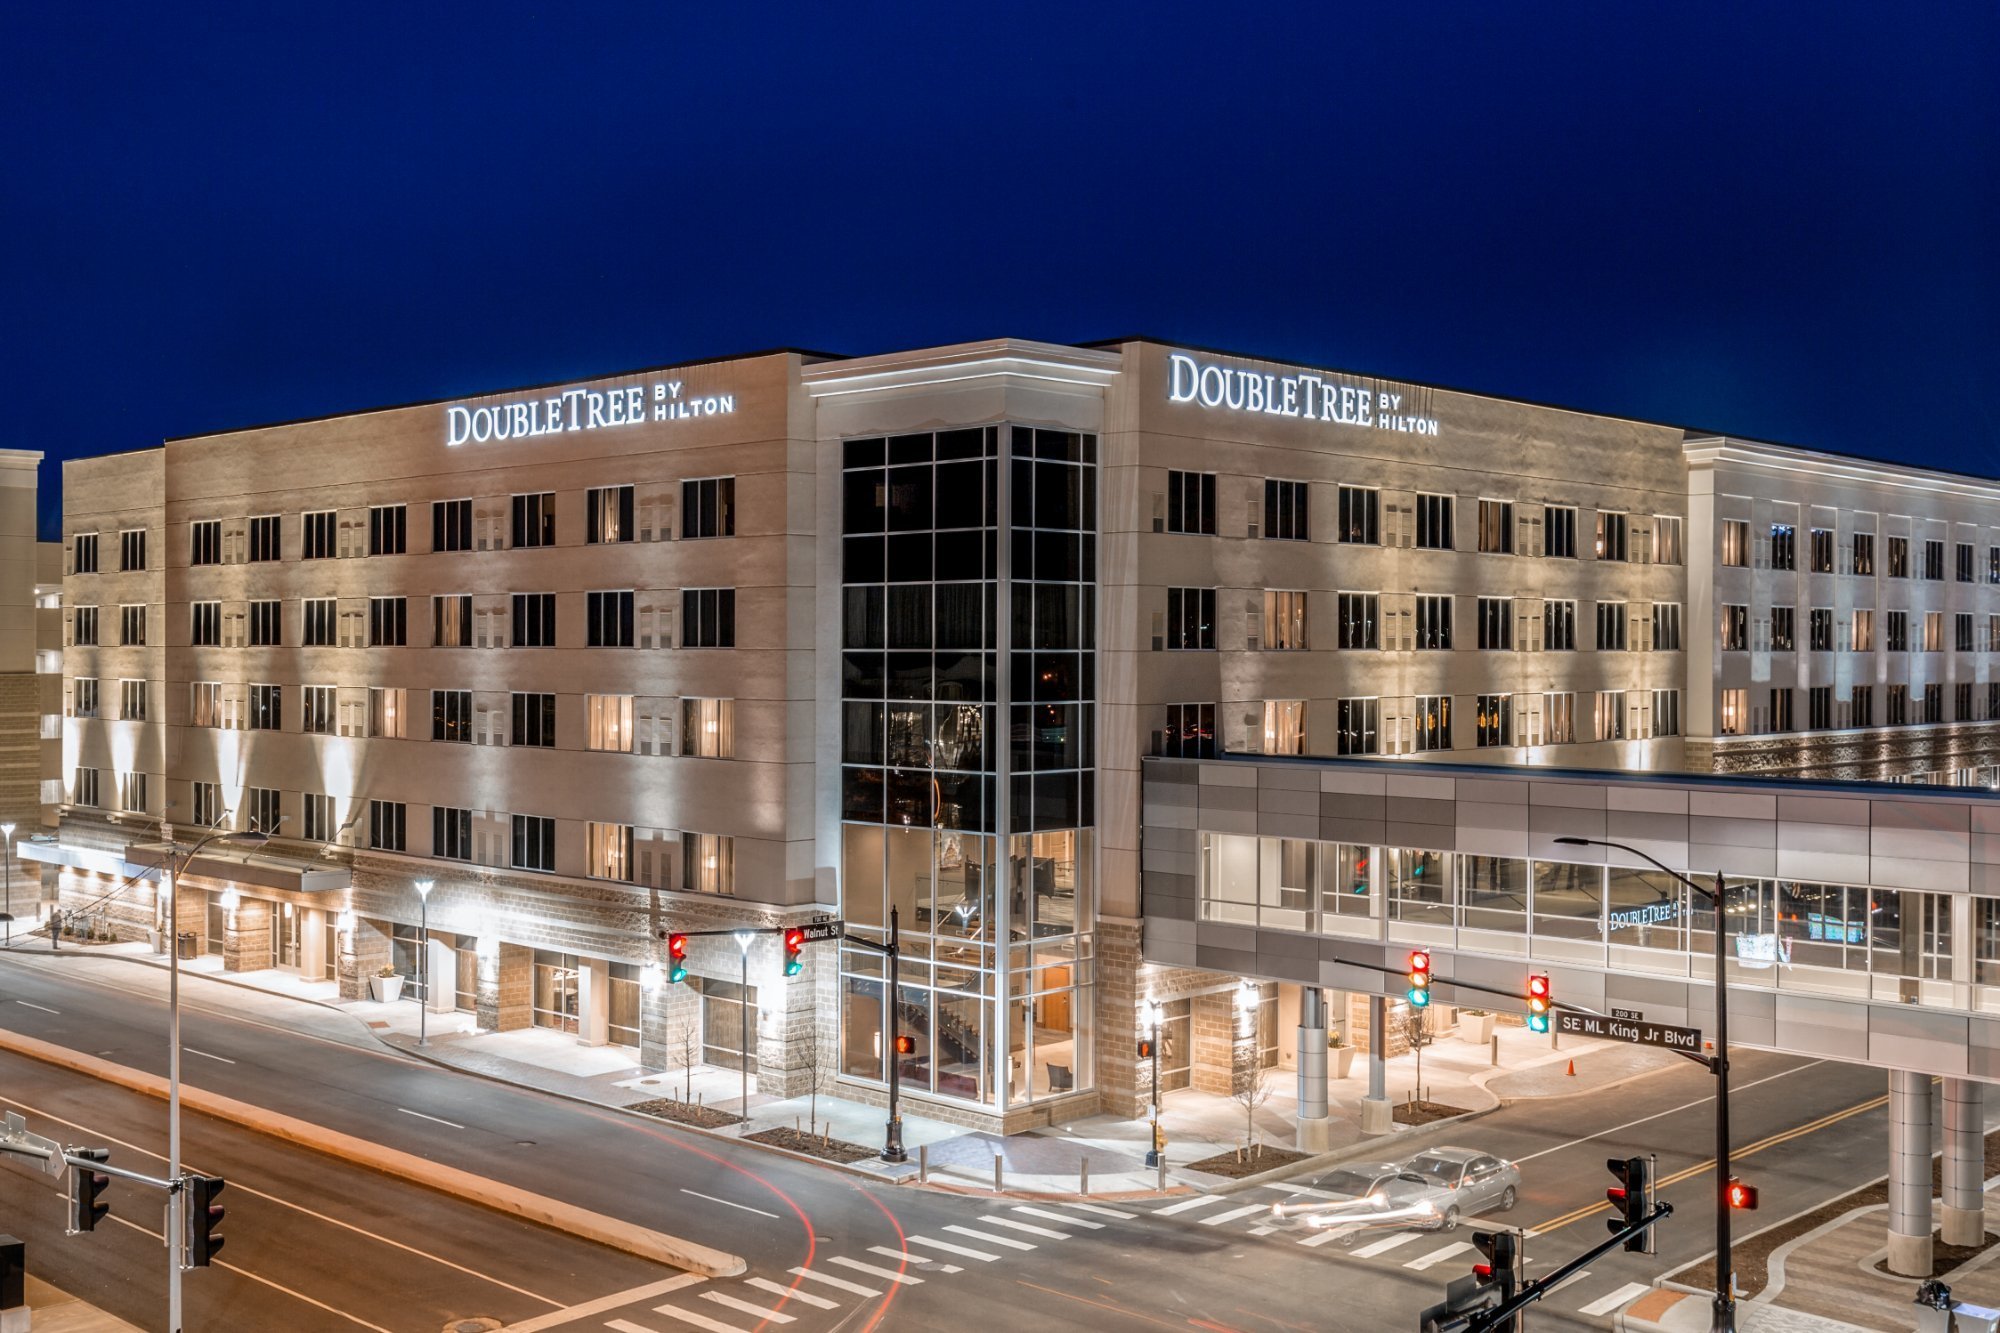 Photo of DoubleTree by Hilton Evansville, Evansville, IN